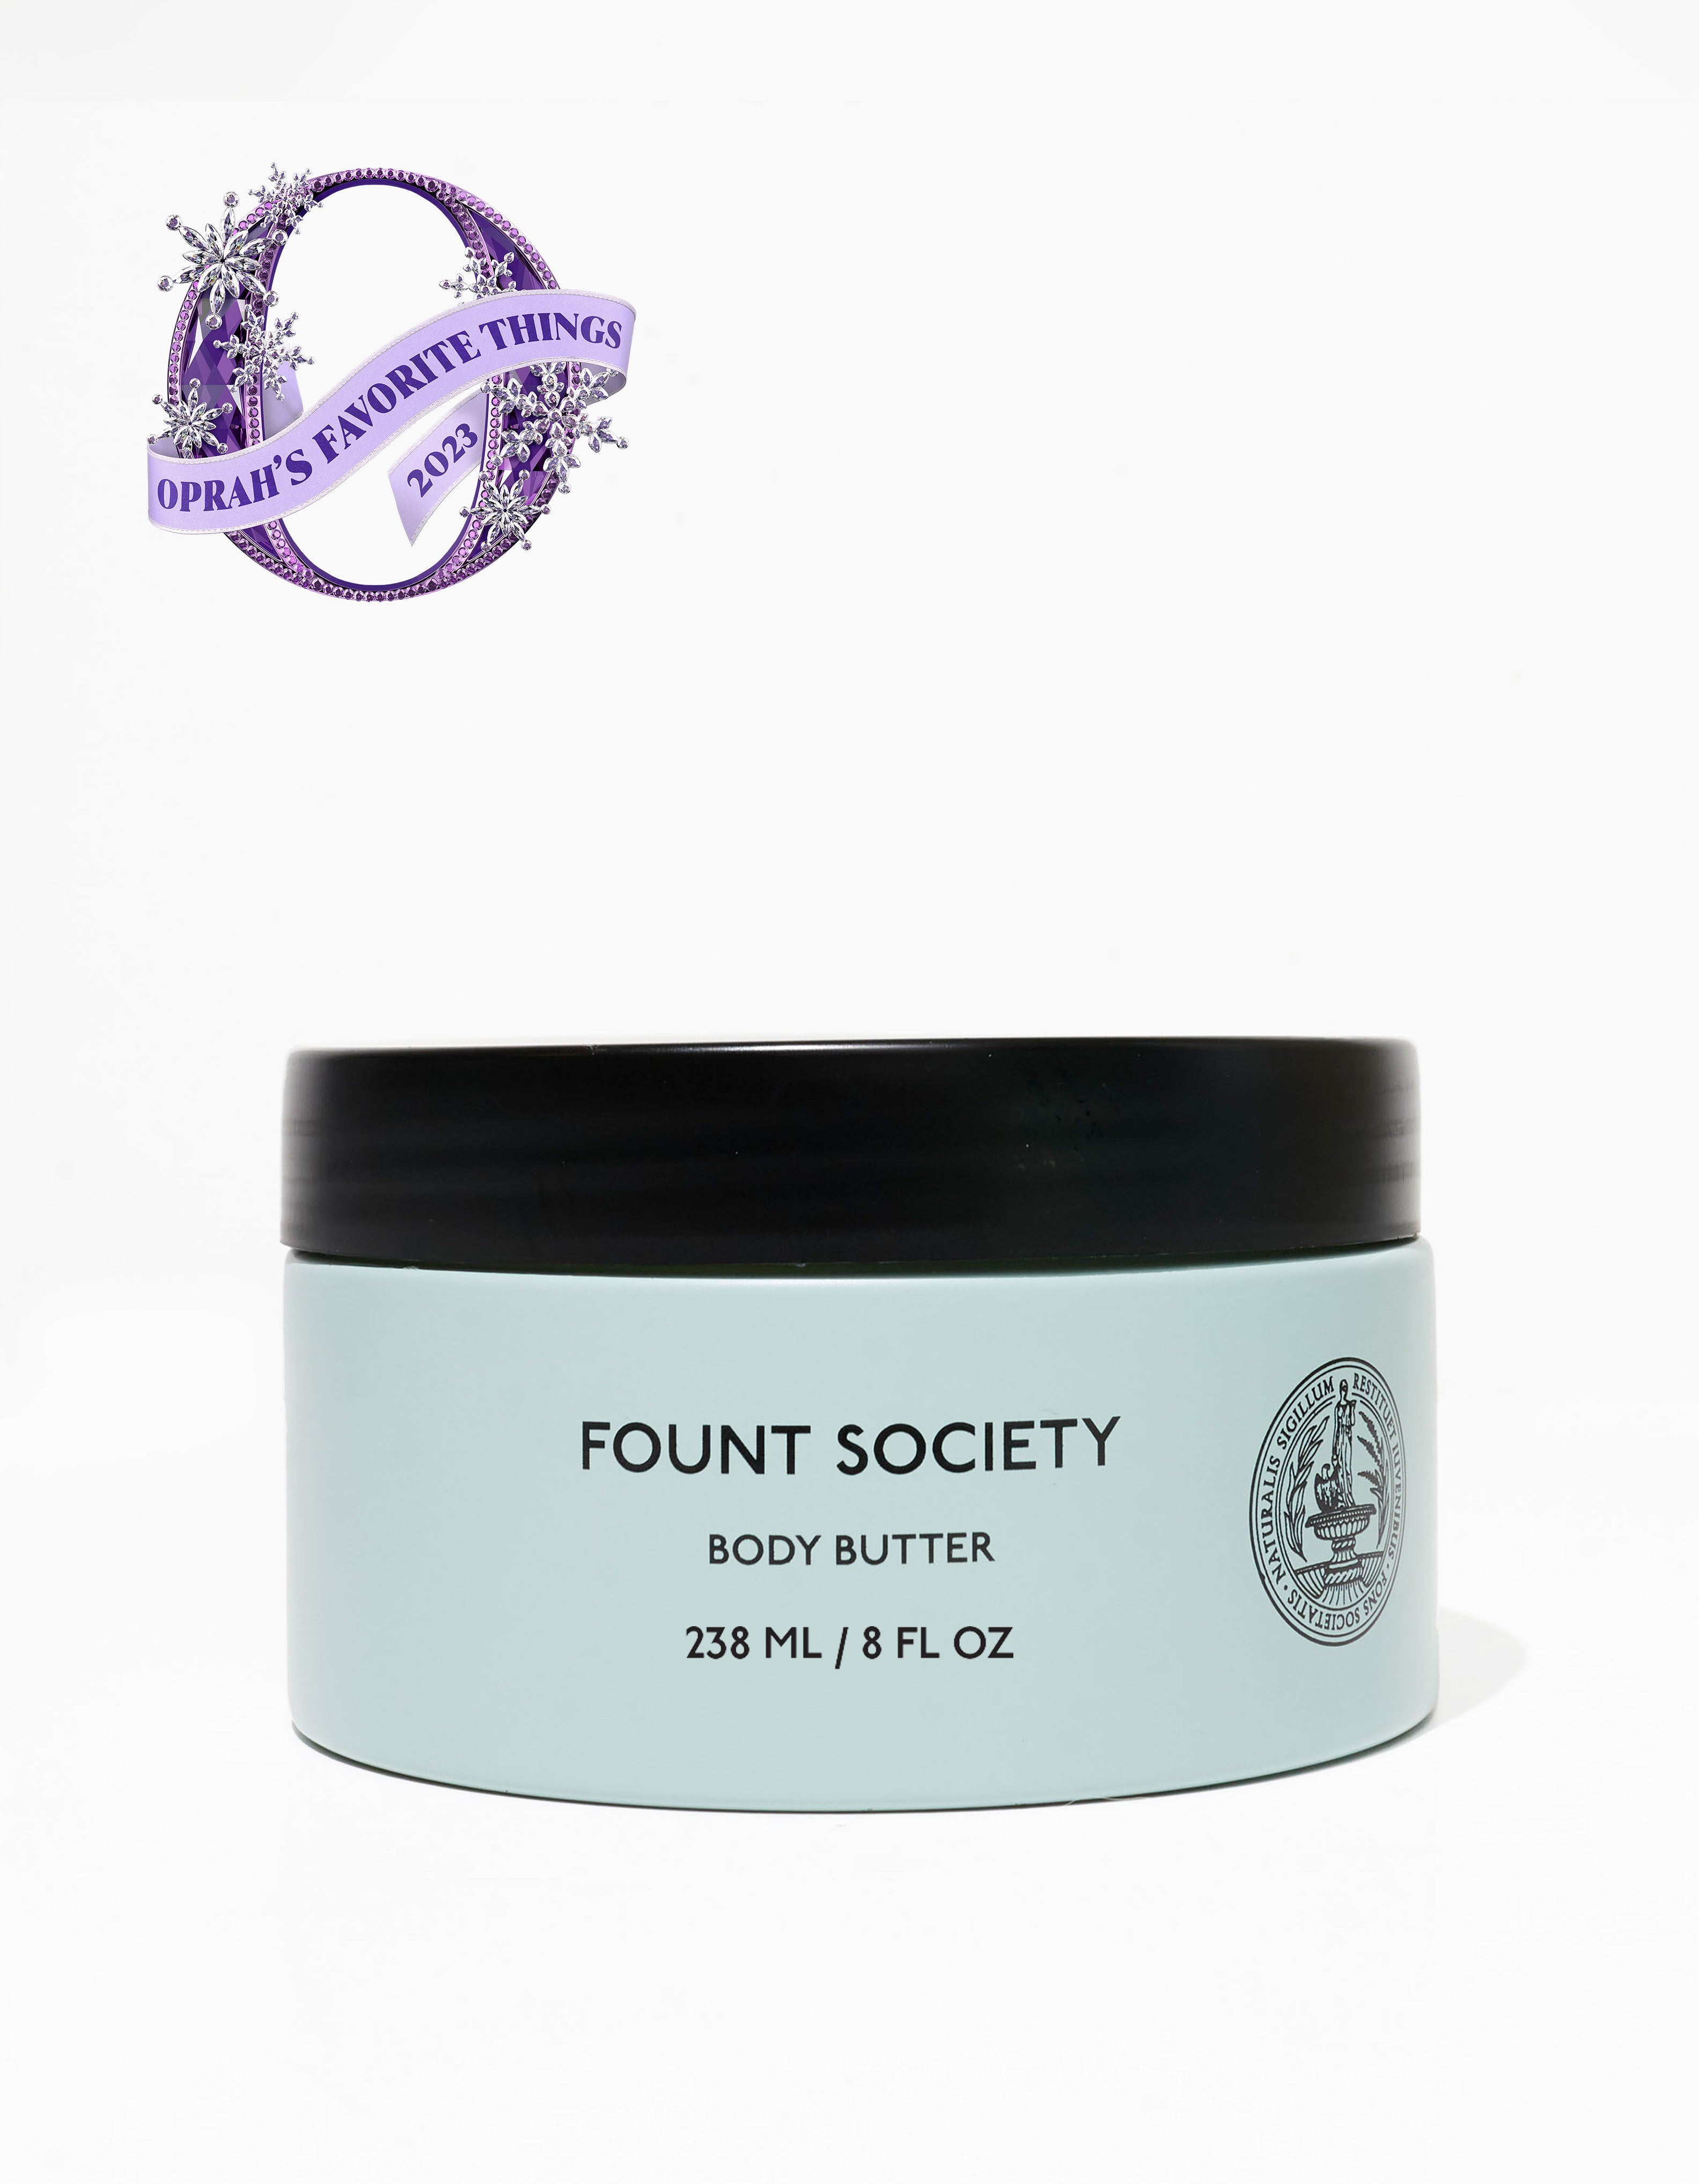 A photo of a light blue jar of body butter from Cozy Earth with a black lid. The front label has the text "COZY EARTH BODY BUTTER 238 ML / 8 FL OZ." An emblem beside it shows it as one of "OPRAH'S FAVORITE THINGS 2023."
